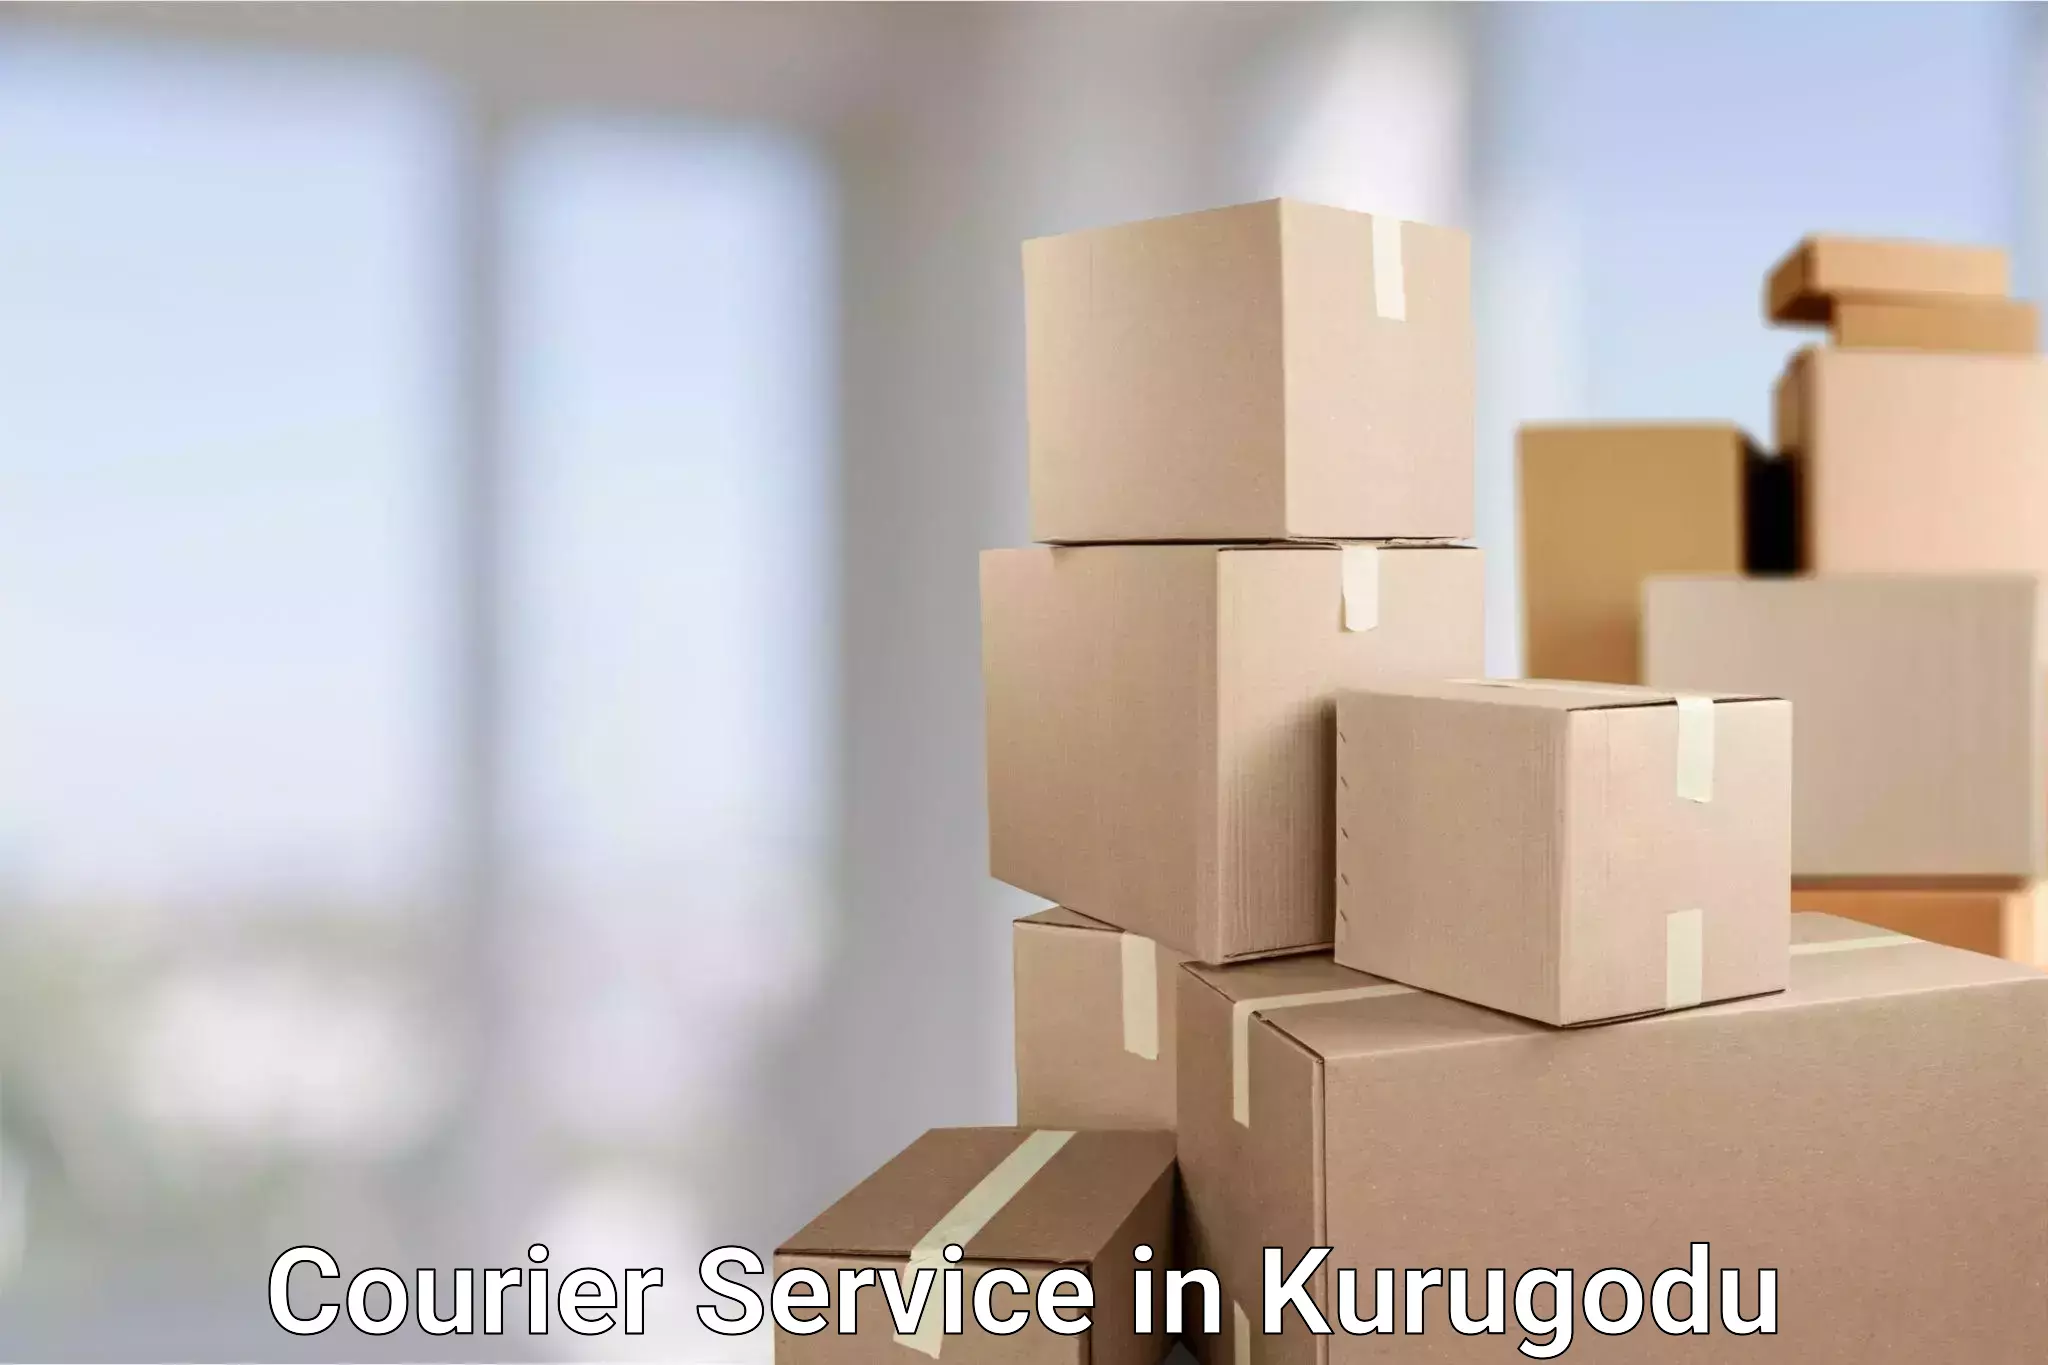 End-to-end delivery in Kurugodu